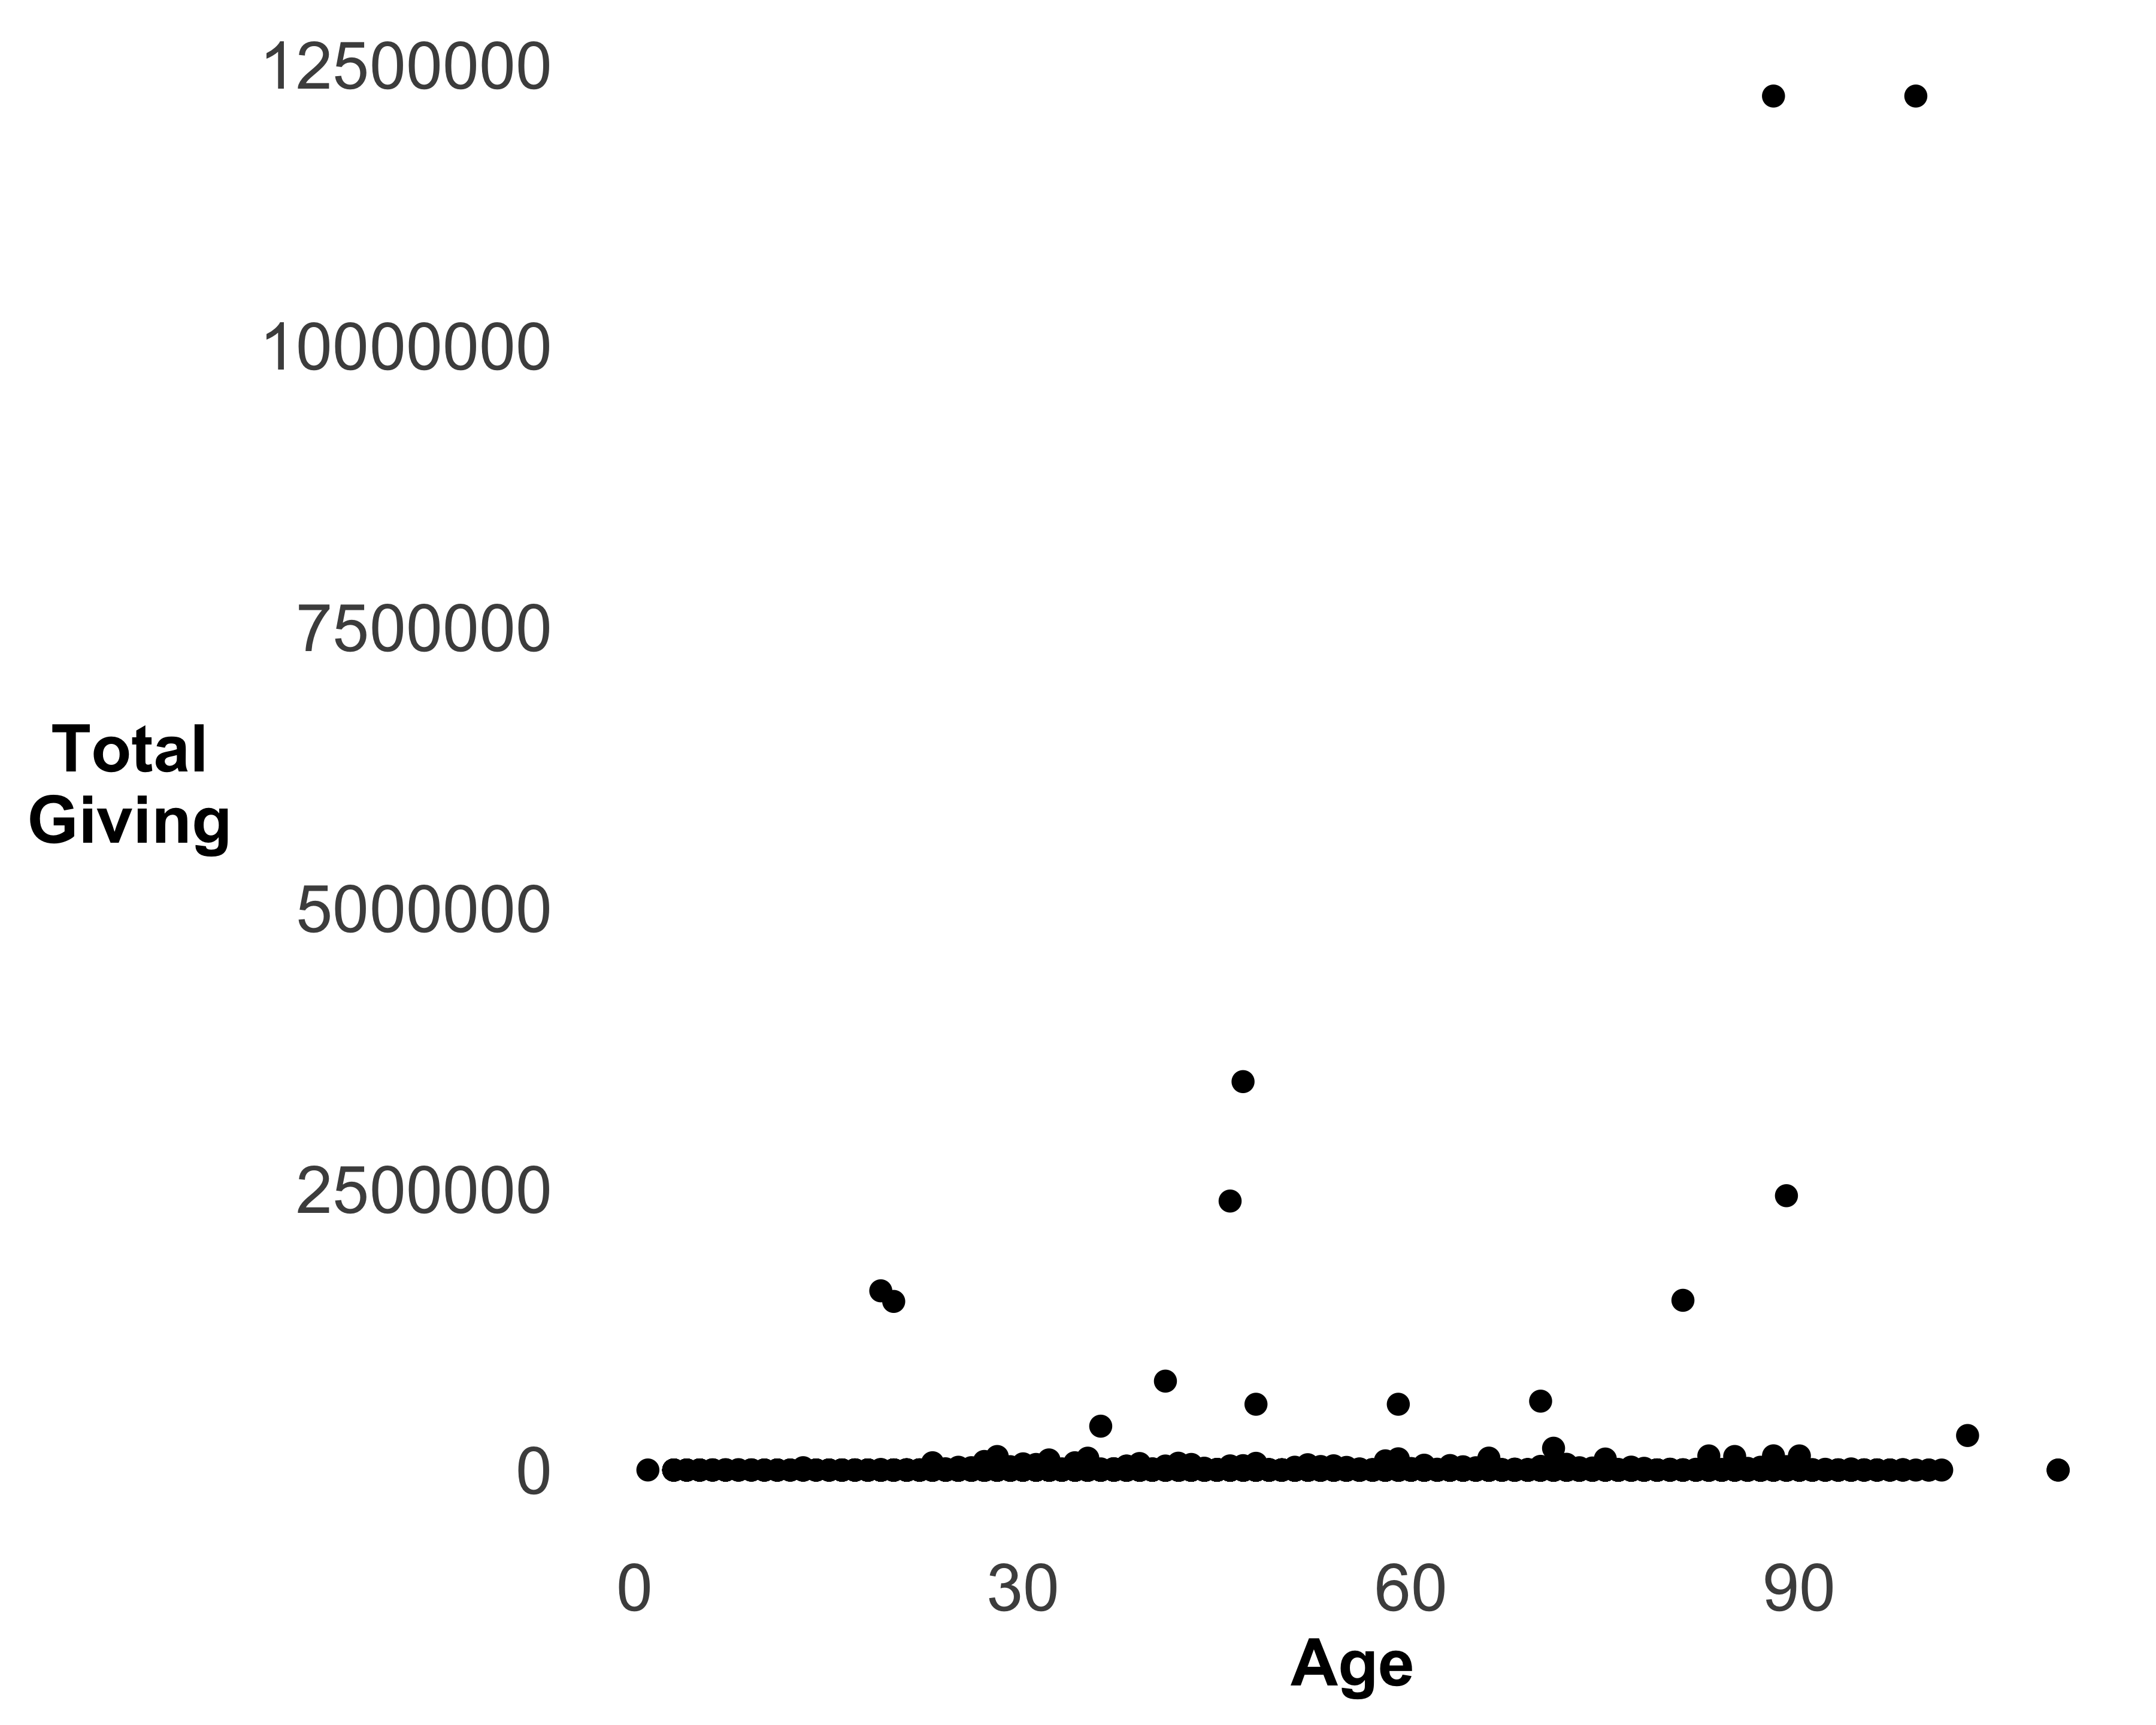 A scatter plot of age and total giving